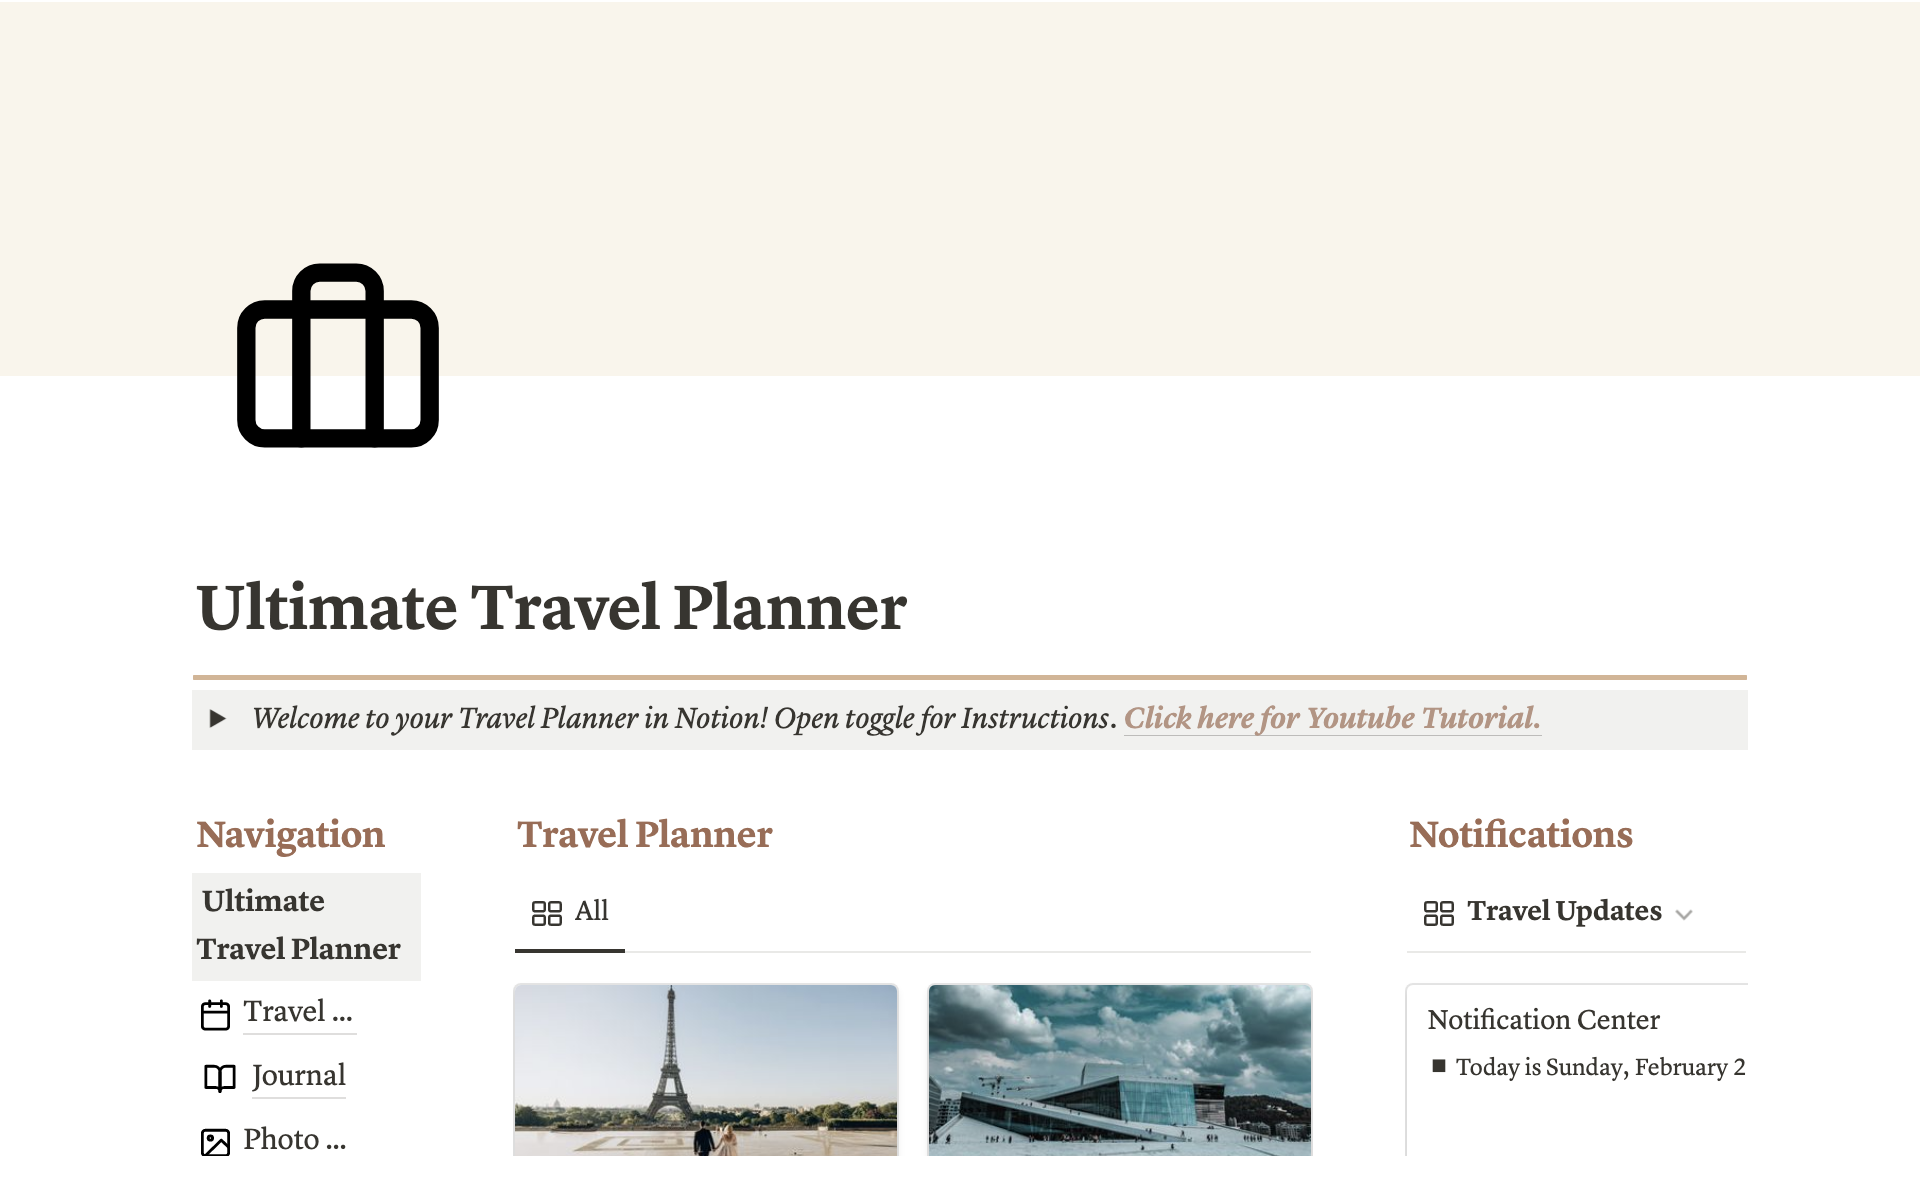 The Ultimate Travel Planner helps you plan multiple trips in one template, create daily itineraries, set & track a travel budget in multiple currencies, write a travel journal, and store travel photos, videos, and booking confirmations.